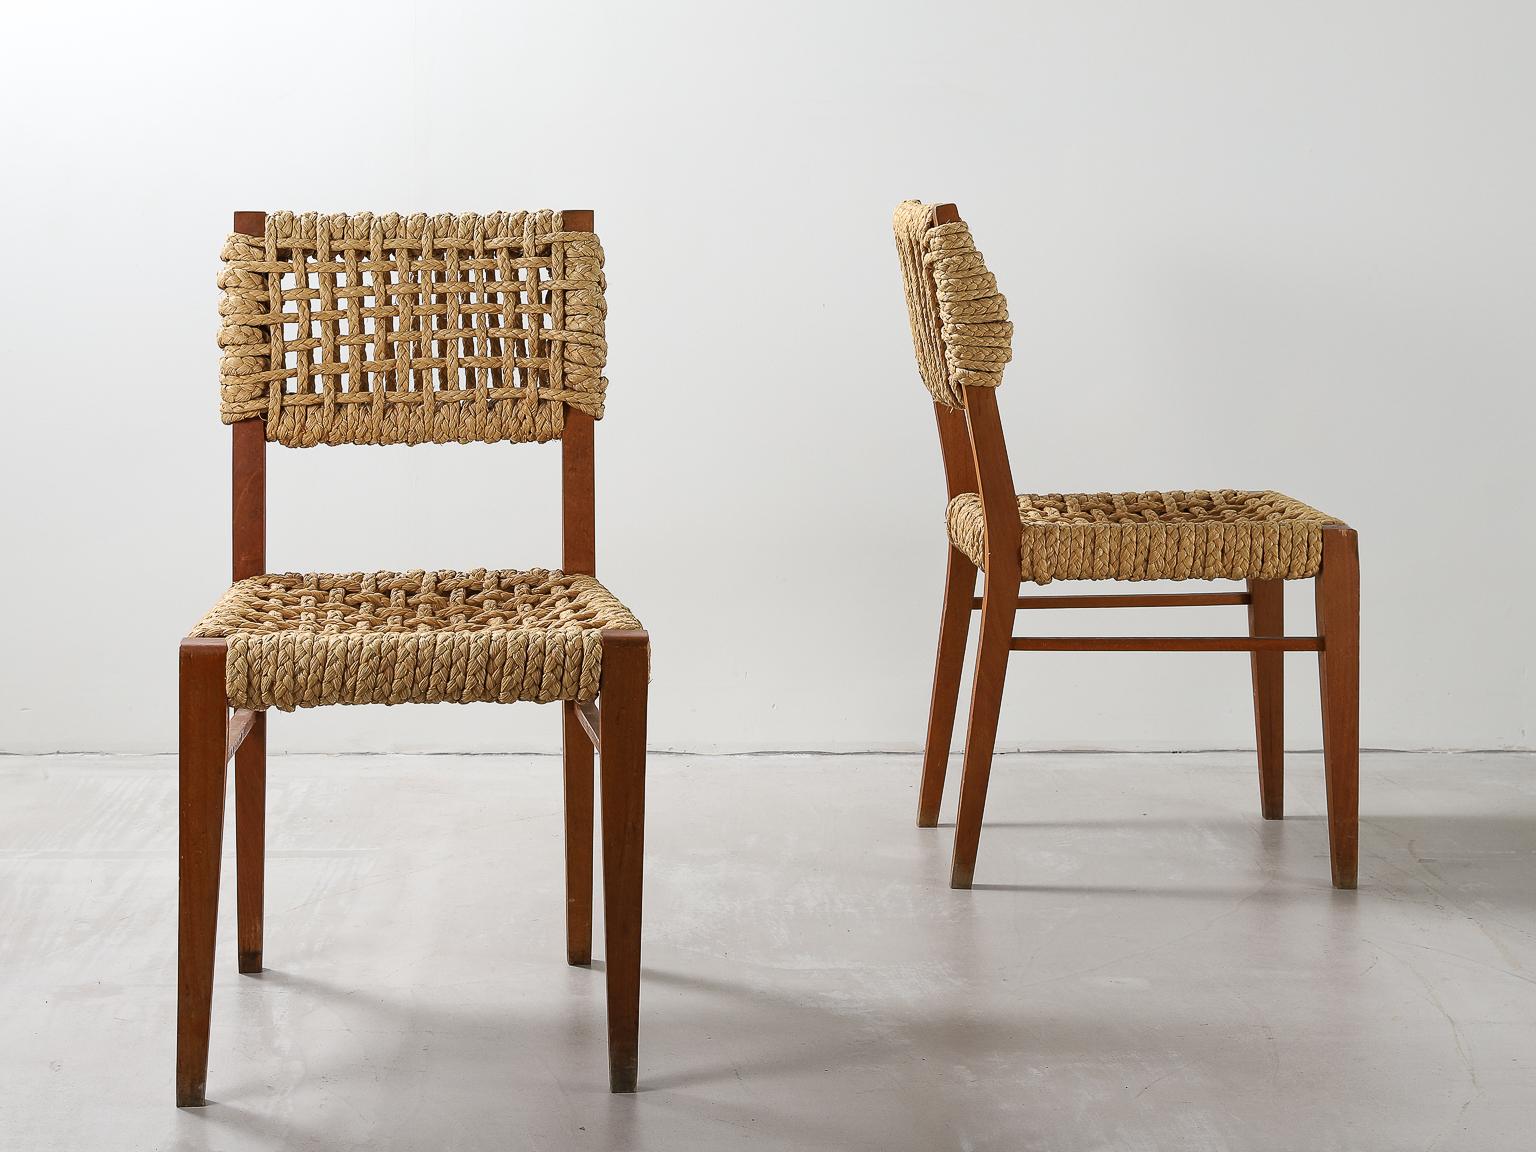 French Pair of Beech & Woven Rope Dining Chairs by Adrien Audoux and Frida Minet, 1950s